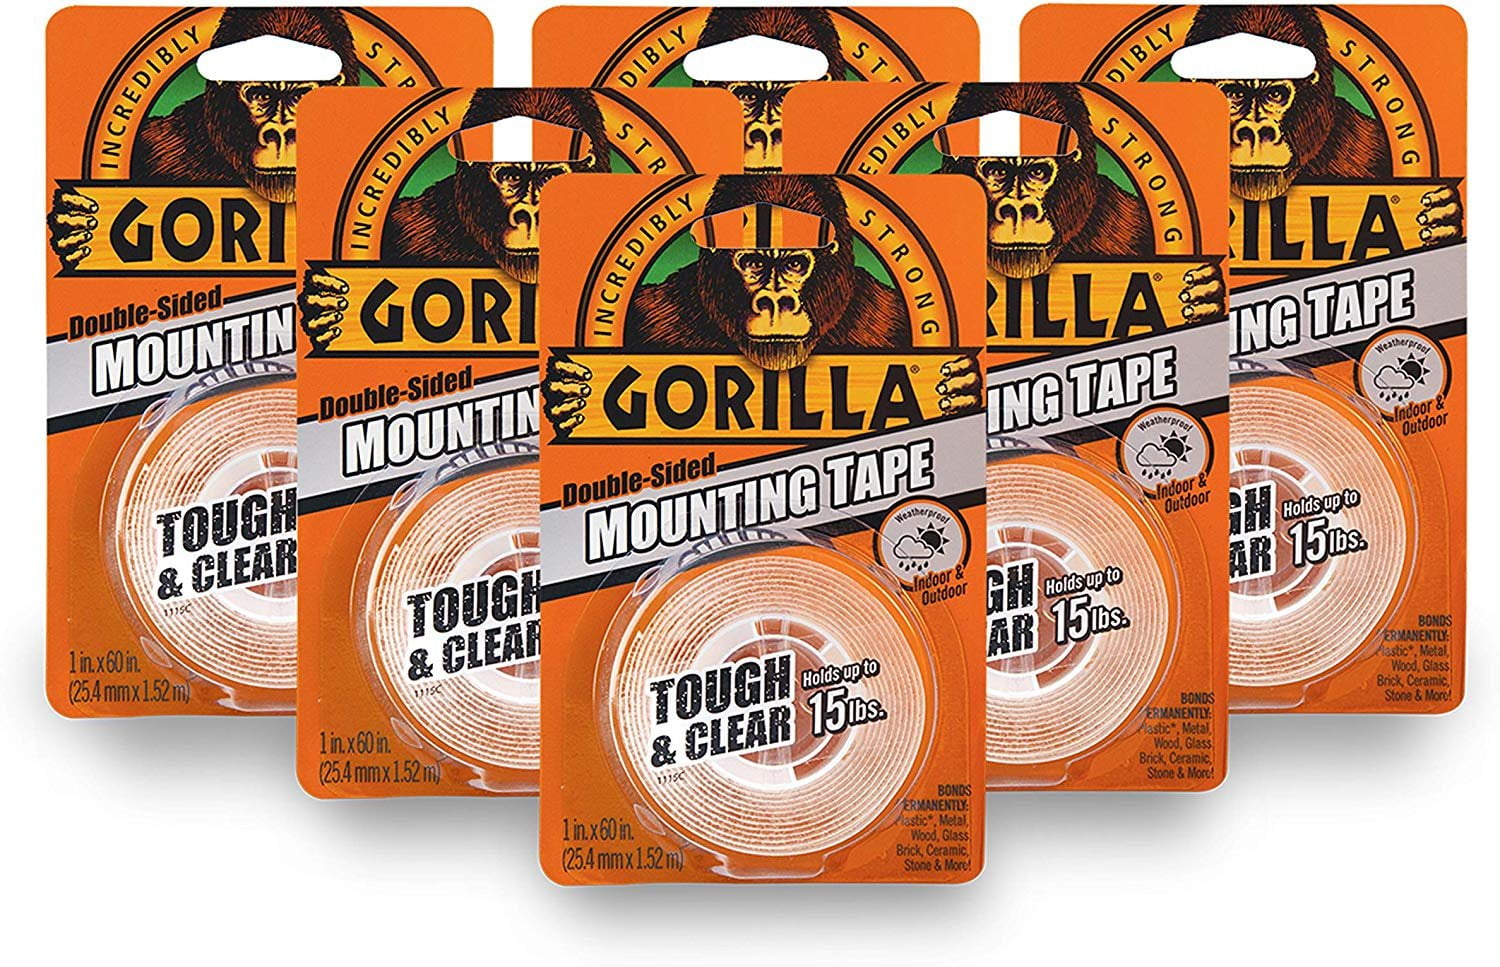 Gorilla Heavy Duty Extra Long Double Sided Mounting Tape 1 x 120